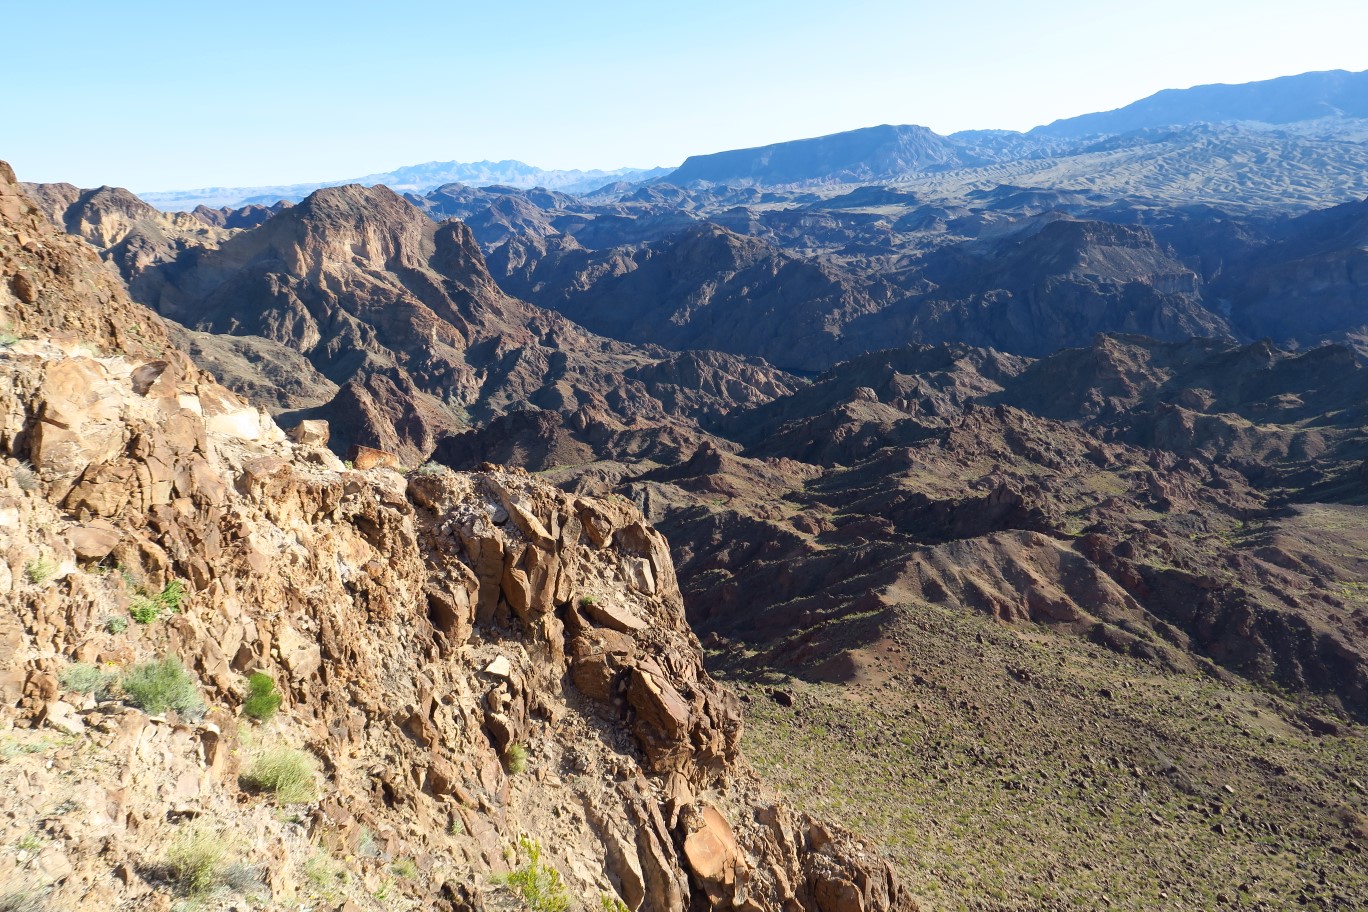 02-scenic_view_from_overlook-Lizardback,Head,and_Horn_peaks_to_left-Devil's_Basin,Moonscape_Canyon_below